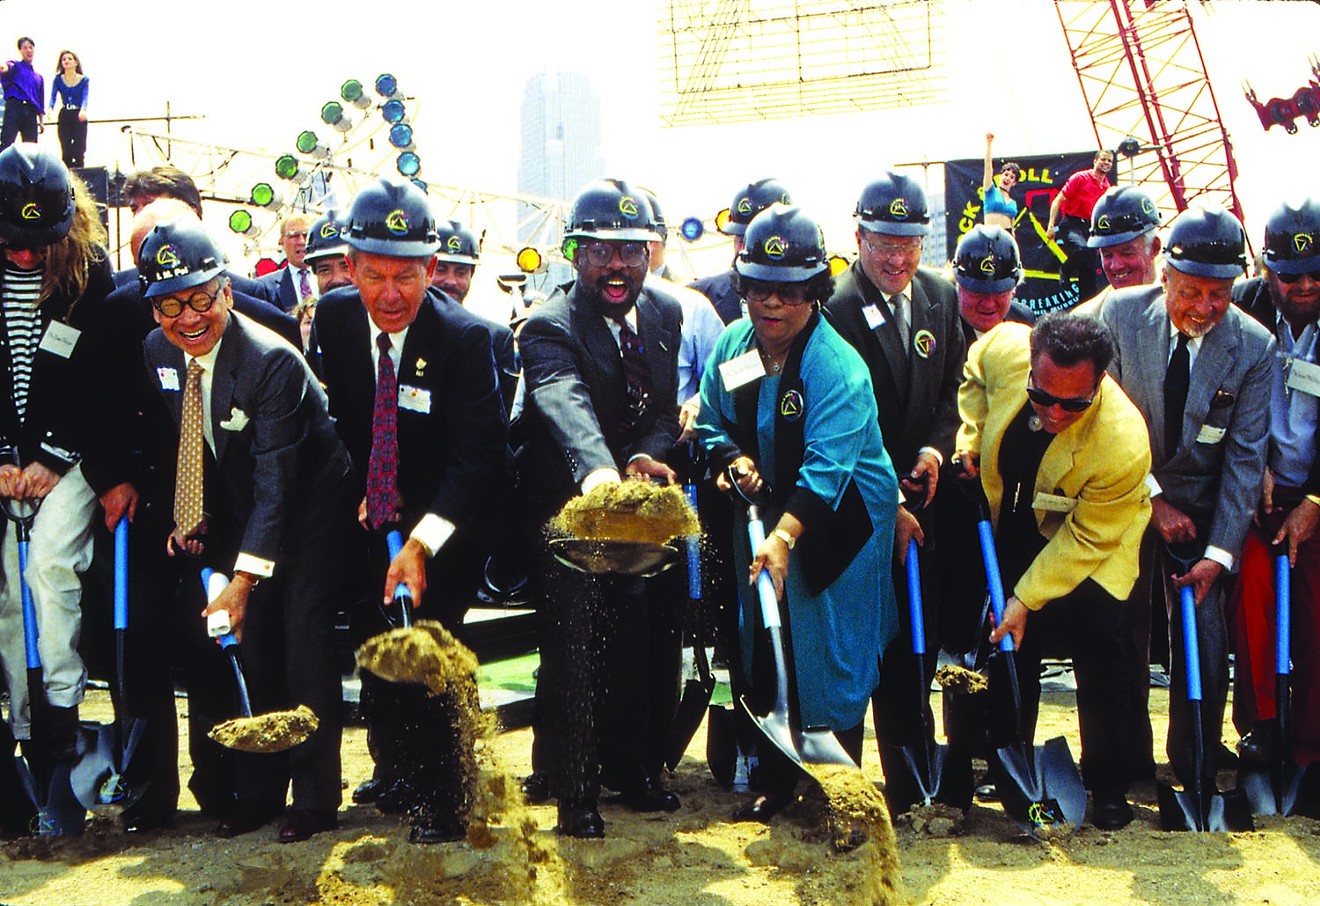 The Rock and Roll Hall of Fame groundbreaking ceremony in Cleveland on June 7, 1993.